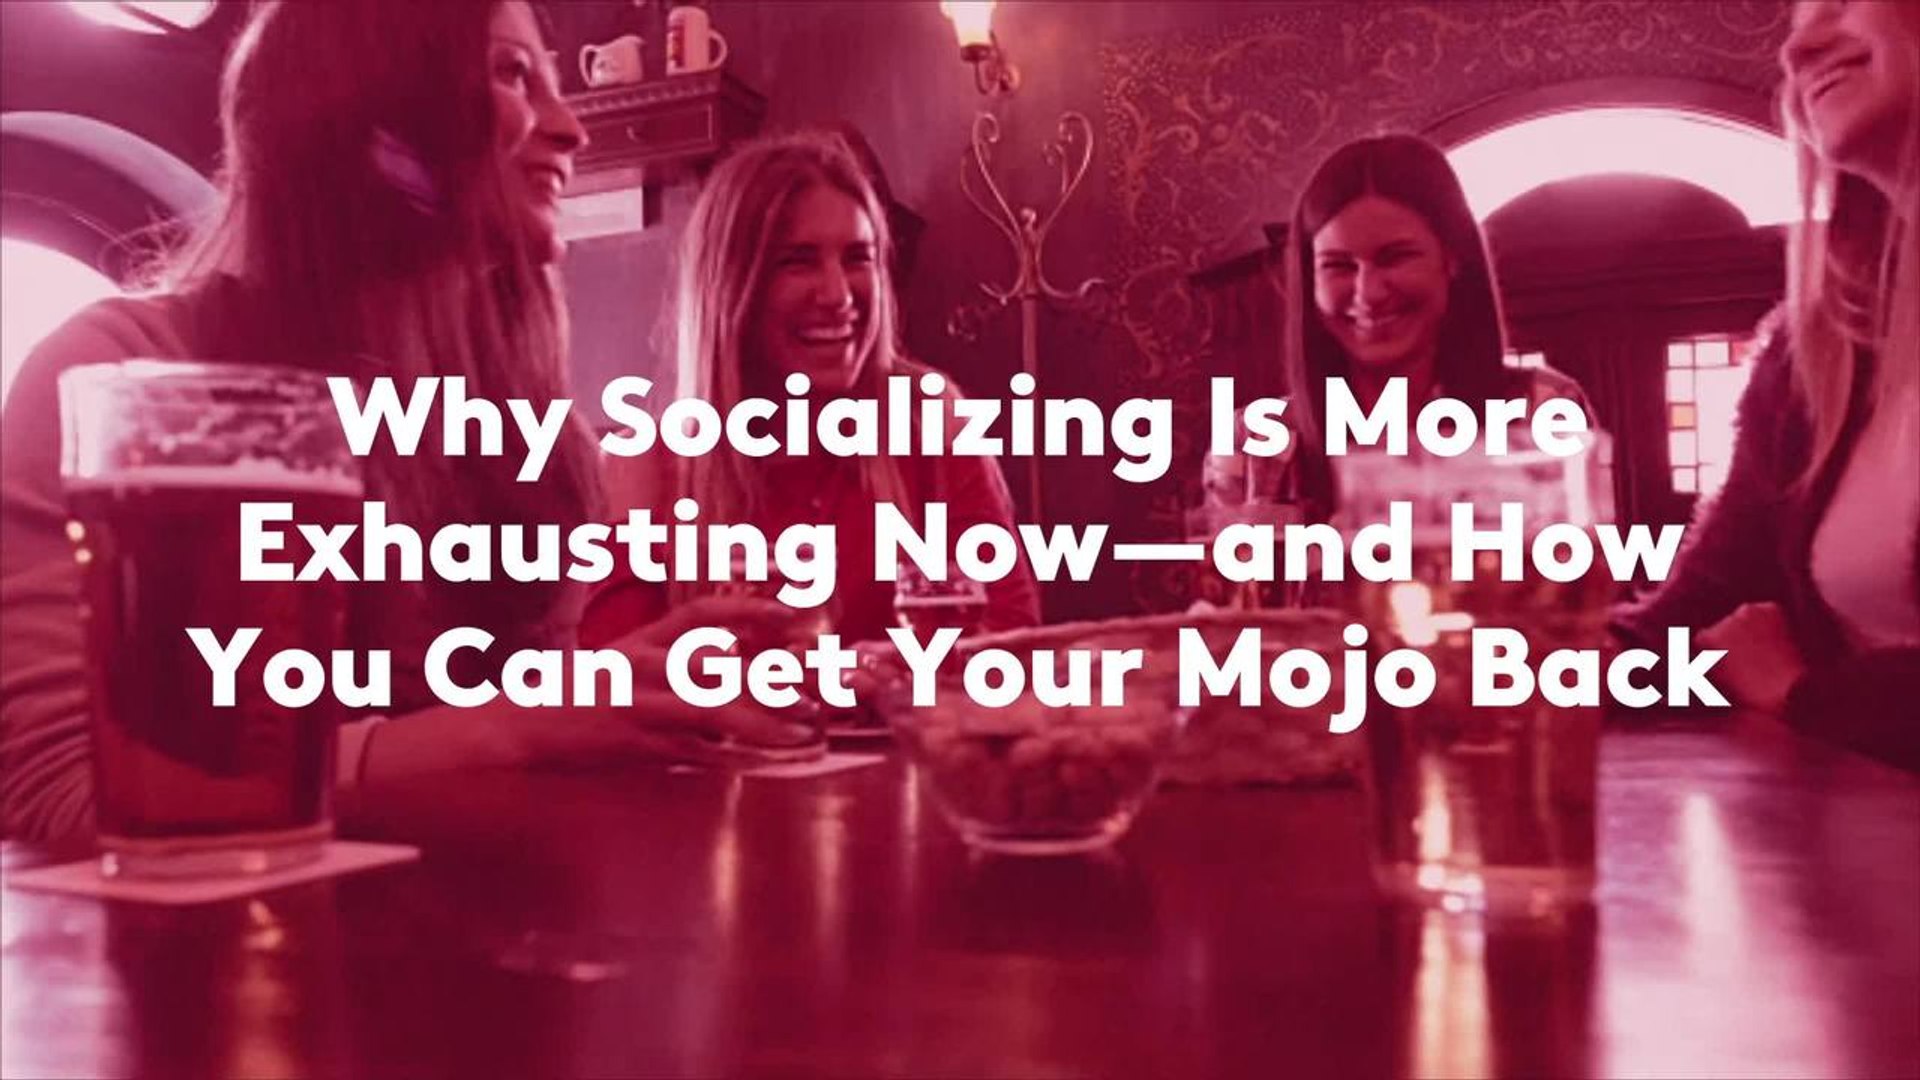 Why Socializing Is More Exhausting Now—and How You Can Get Your Mojo Back